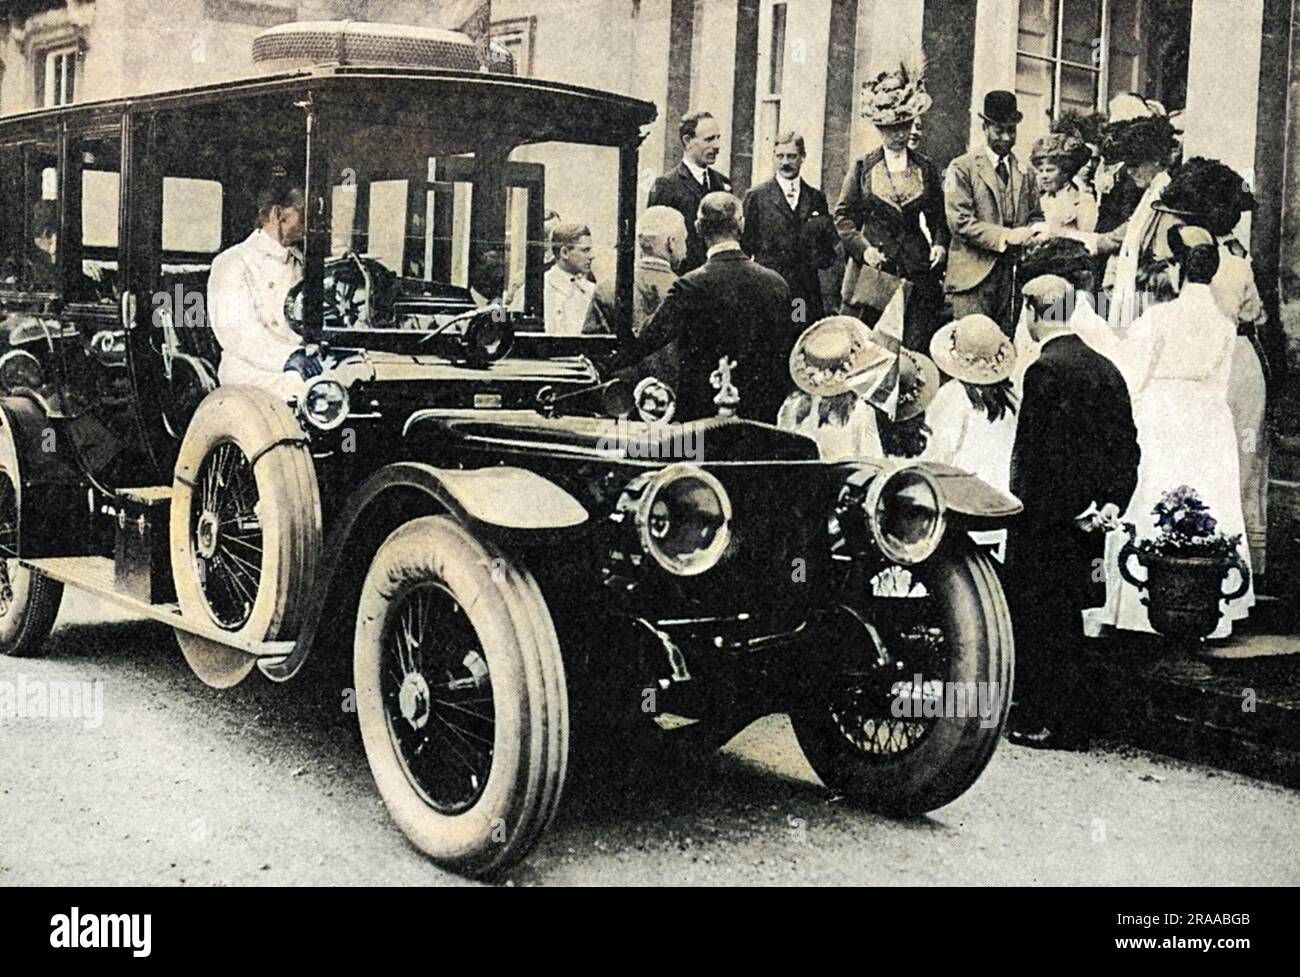 King George V and Queen Mary about to enter their Daimler car during a visit to Yorkshire in July 1912.     Date: 1912 Stock Photo